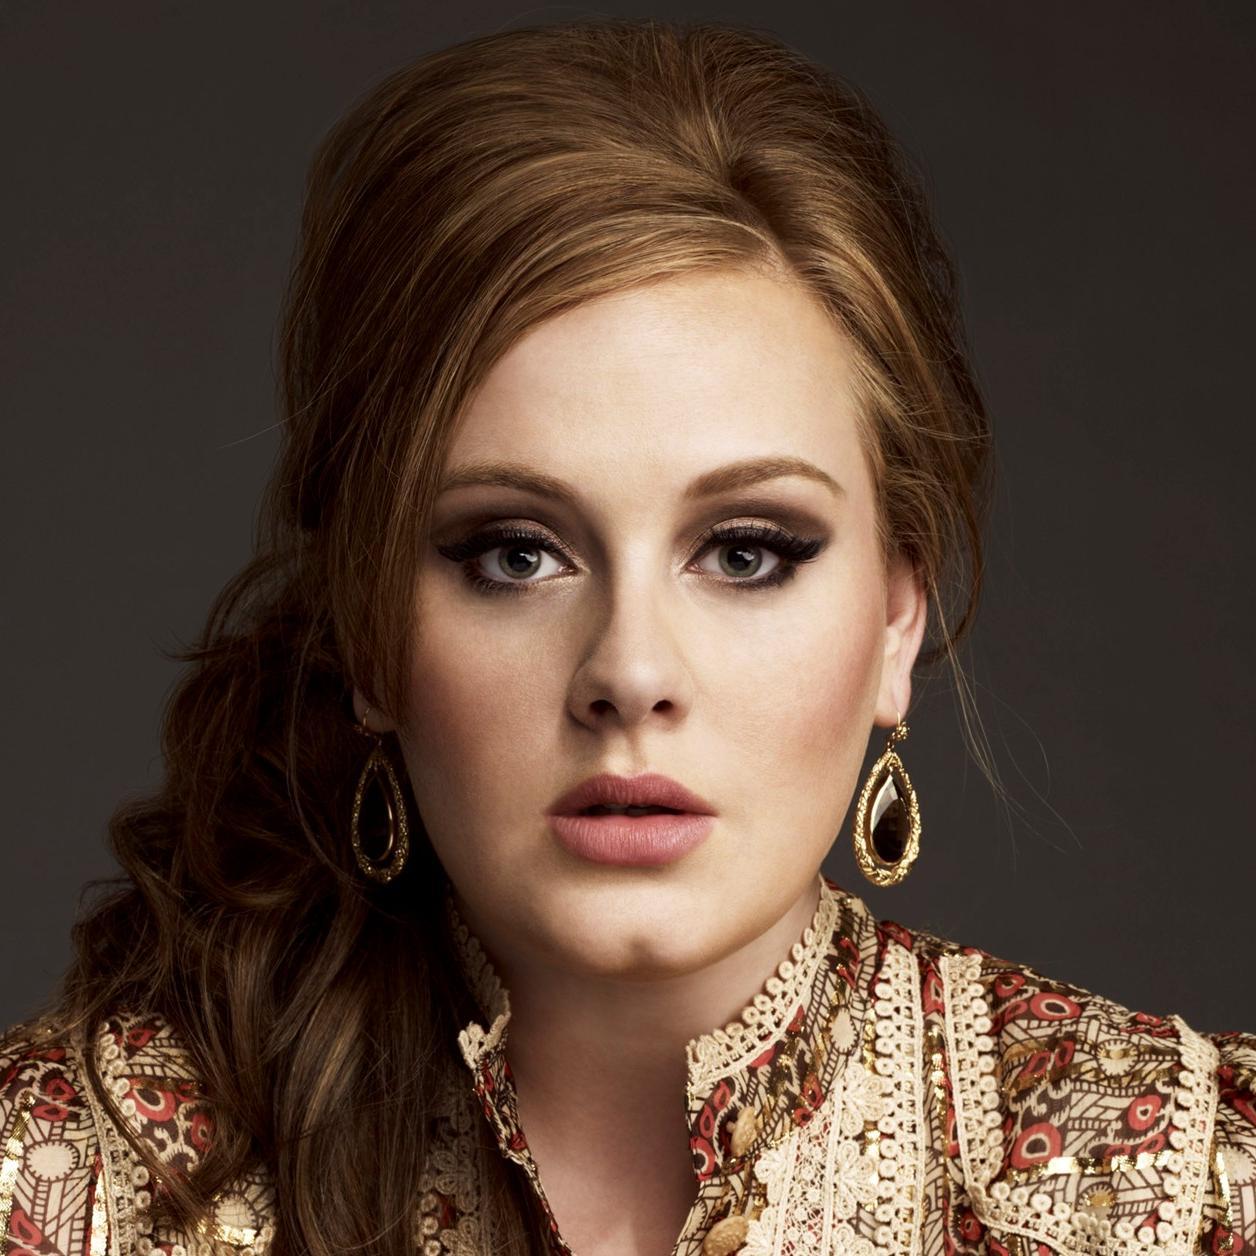 All about Adele!